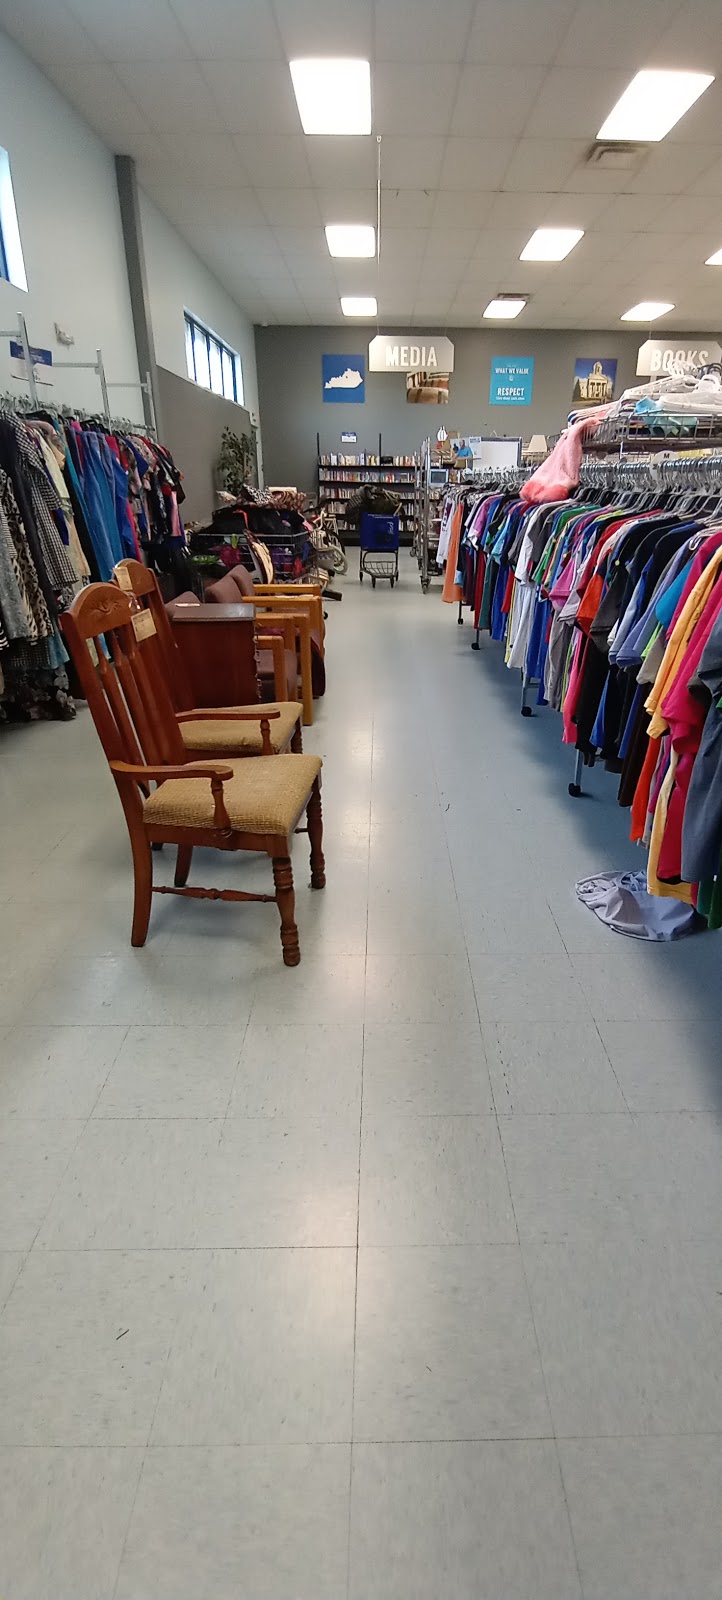 Goodwill - store  | Photo 2 of 9 | Address: 1240 Anderson Crossing Dr, Lawrenceburg, KY 40342, USA | Phone: (502) 859-4451